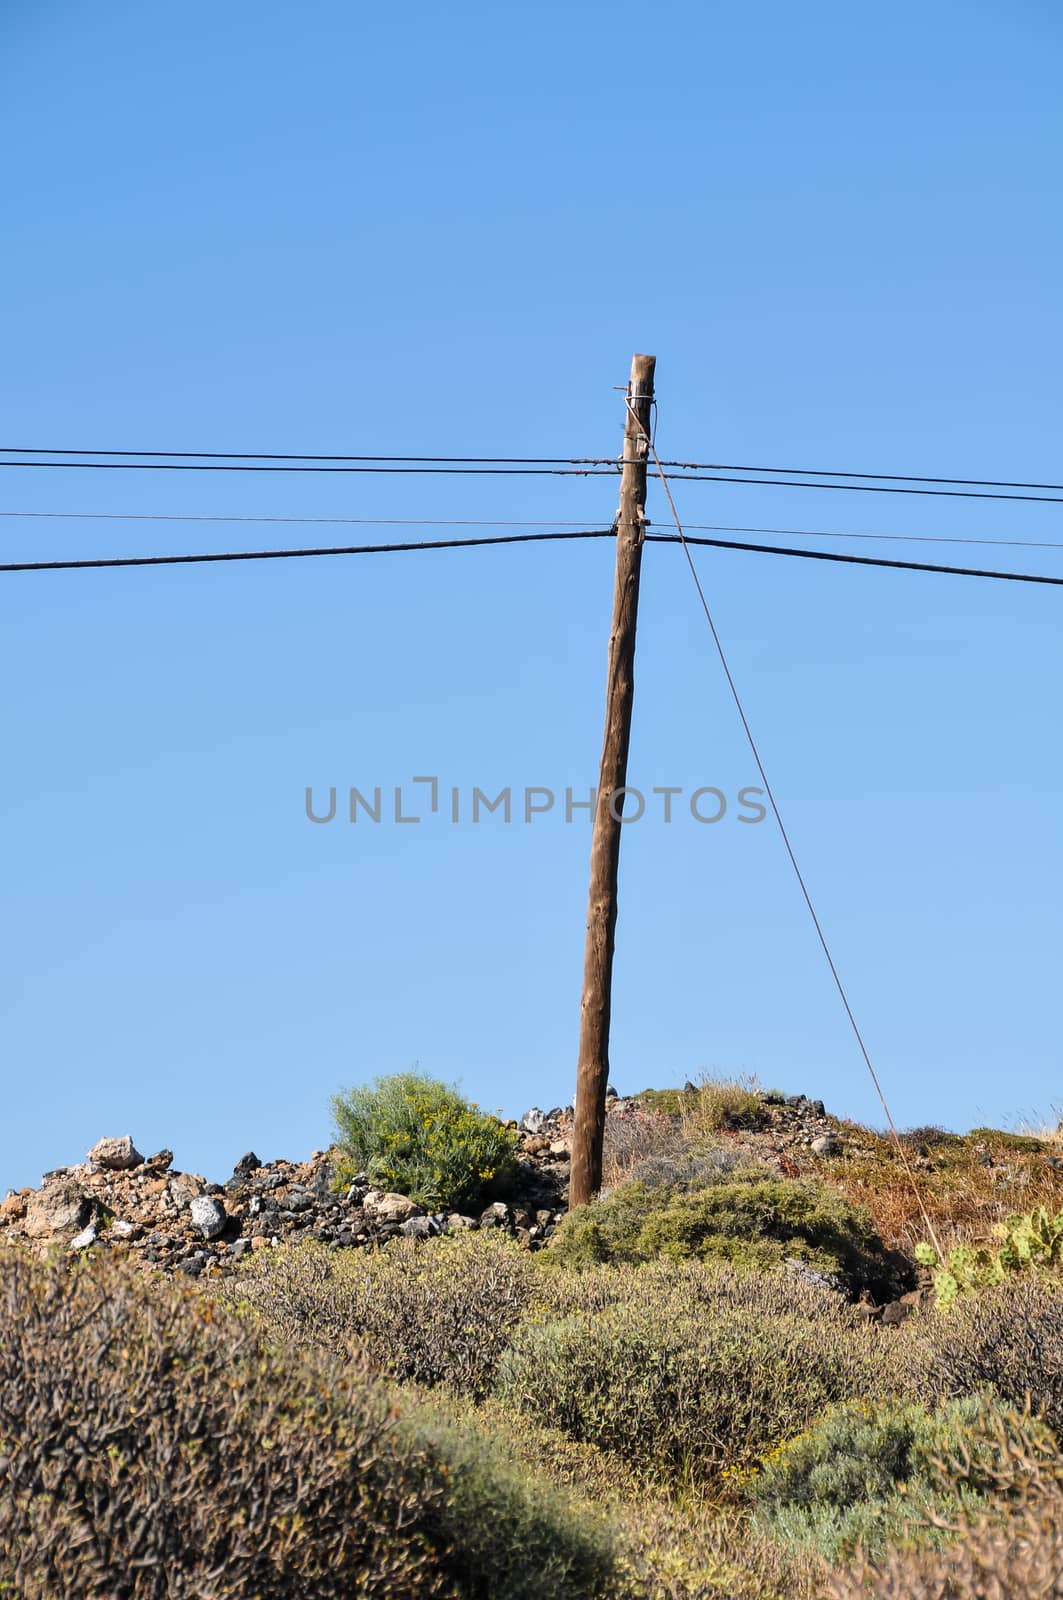 Old retro telephone poles in the field